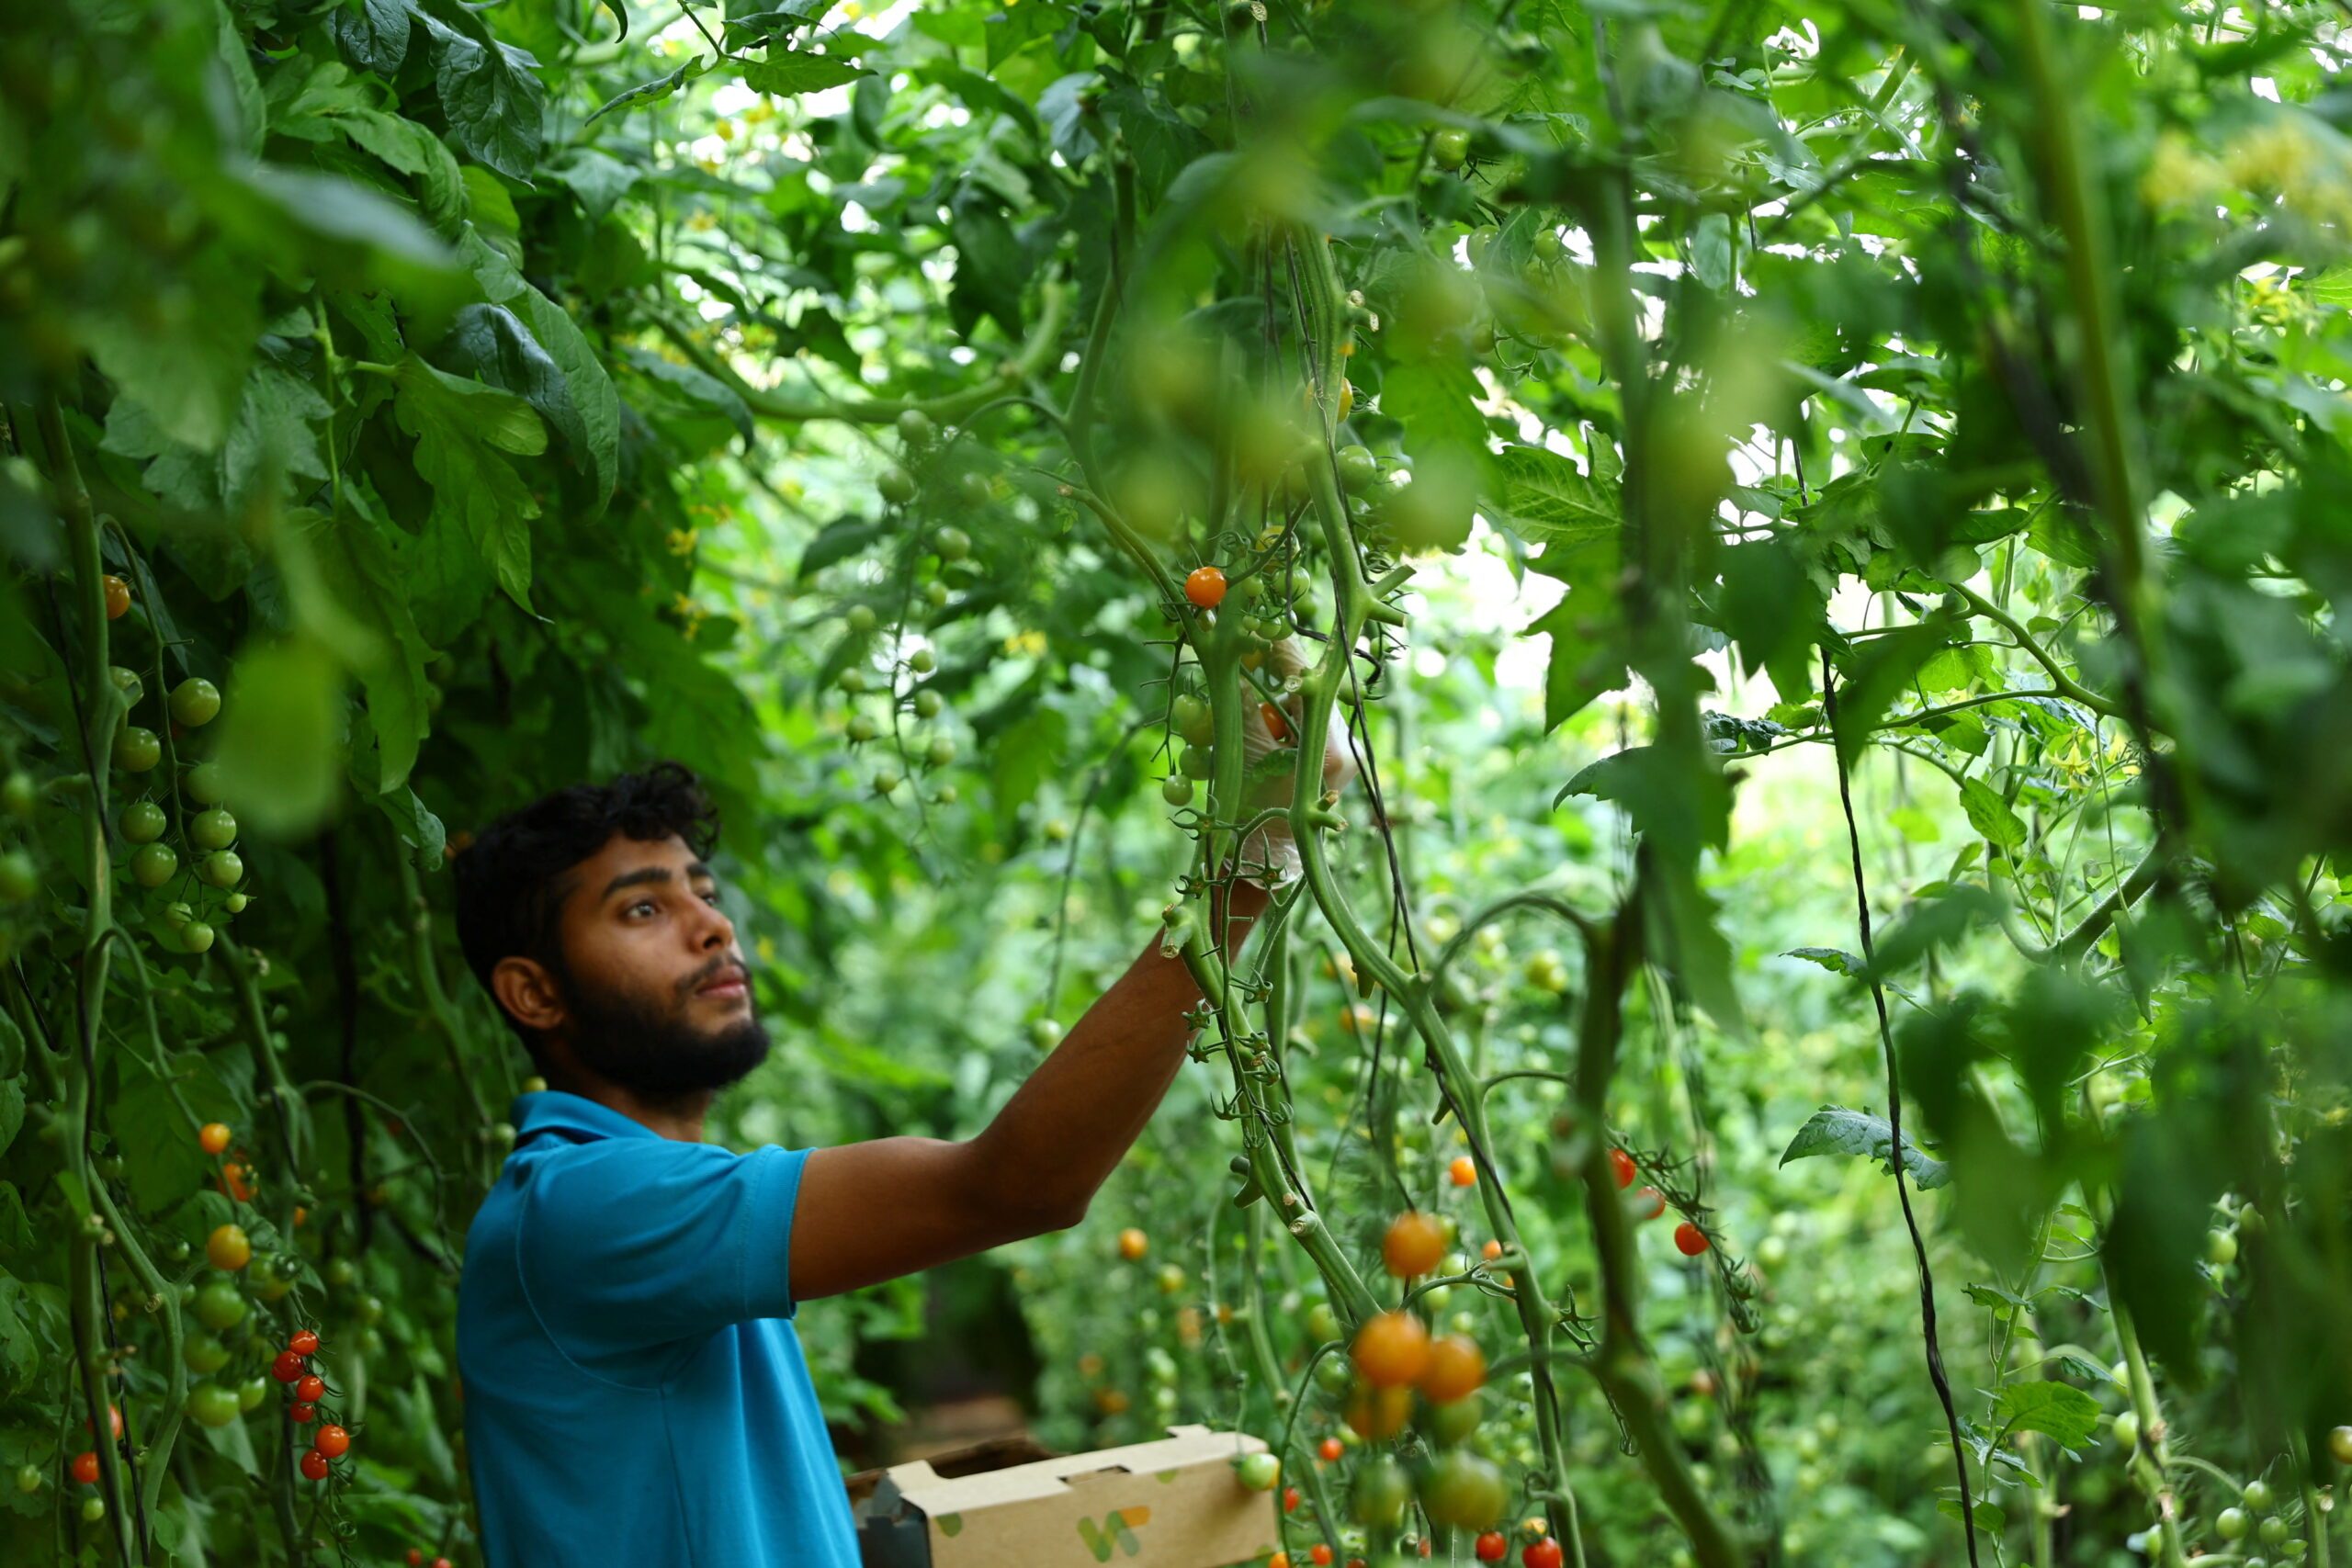 A worker at Veggitech, a start-up farm in Sharjah, UAE. Agtech startups are looking beyond VC entities for funding